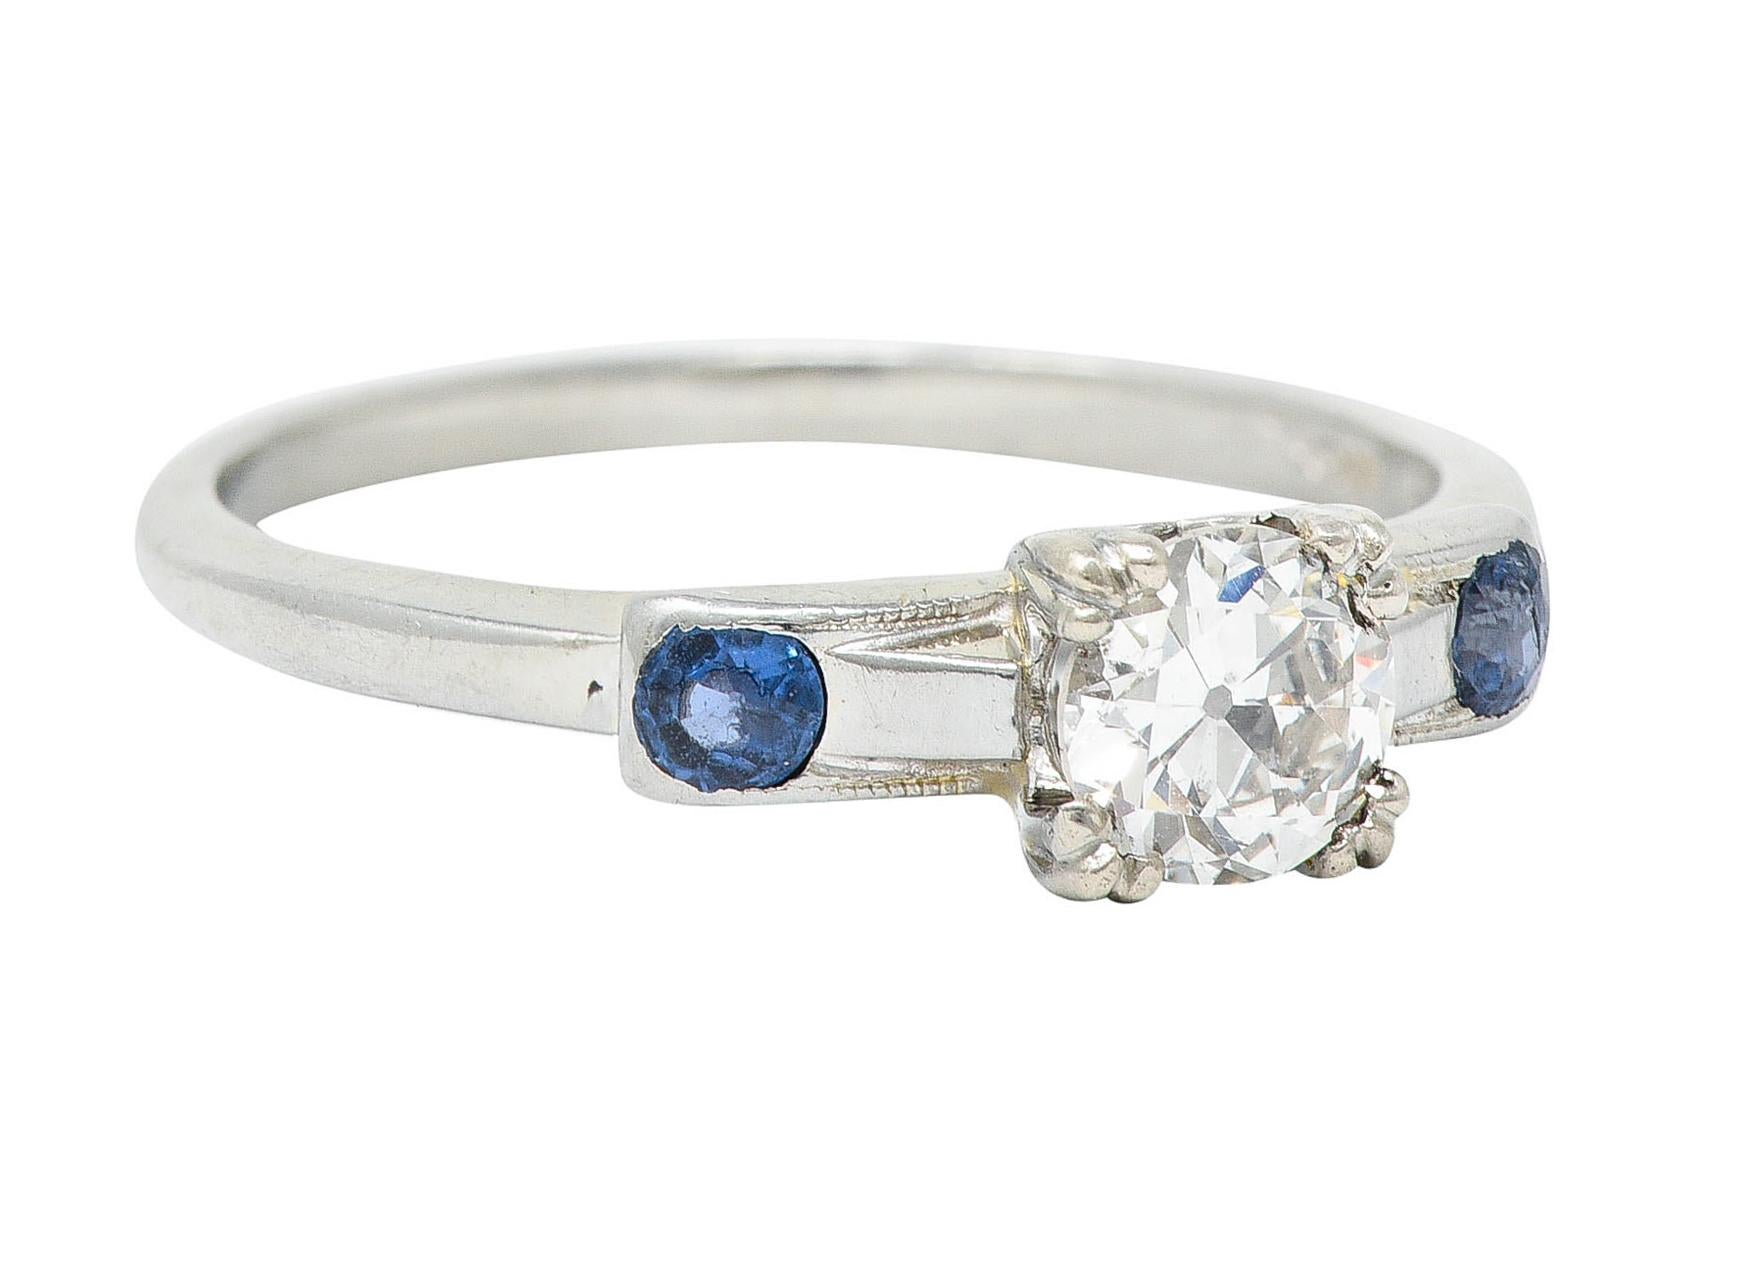 Centering an old European cut diamond weighing approximately 0.43 carat - I color with SI1 clarity

Set by tri-bead prongs in a stylized head

Flanked by rectangular forms accented by round cut sapphires

Cornflower blue in color while weighing in